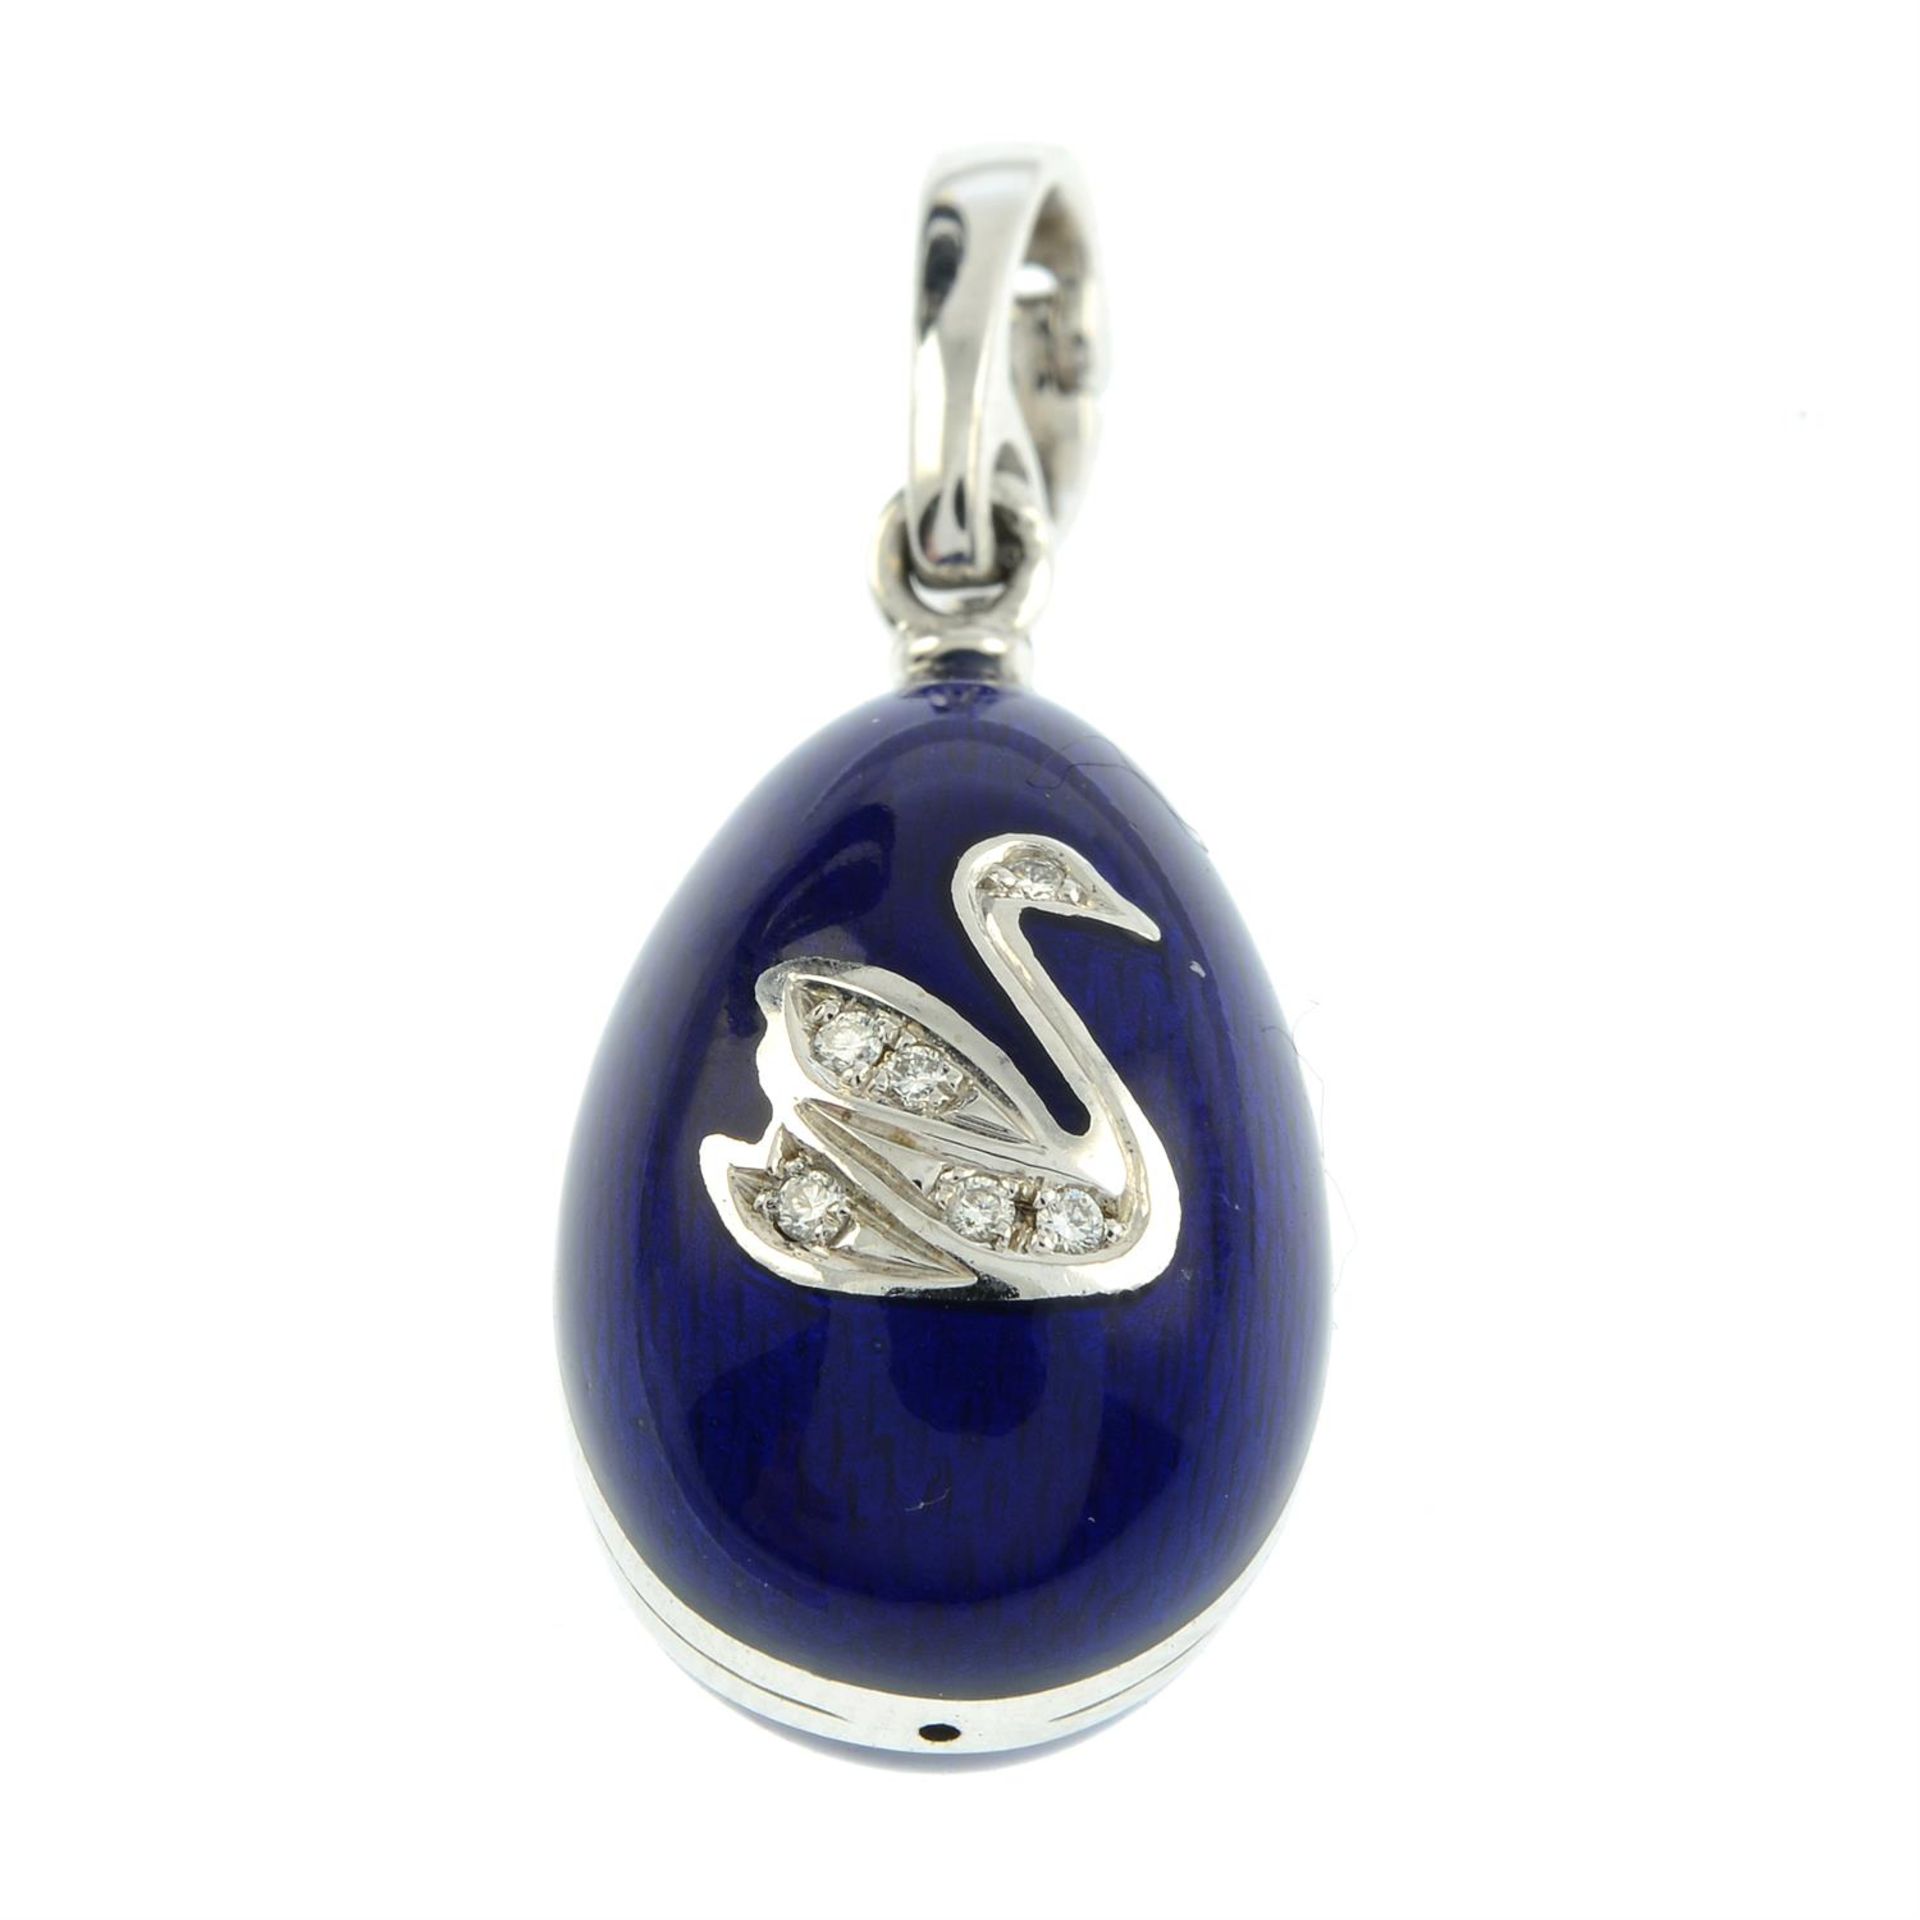 A limited edition 18ct gold blue enamel egg pendant, with diamond swan highlight, by Fabergé. - Image 2 of 5